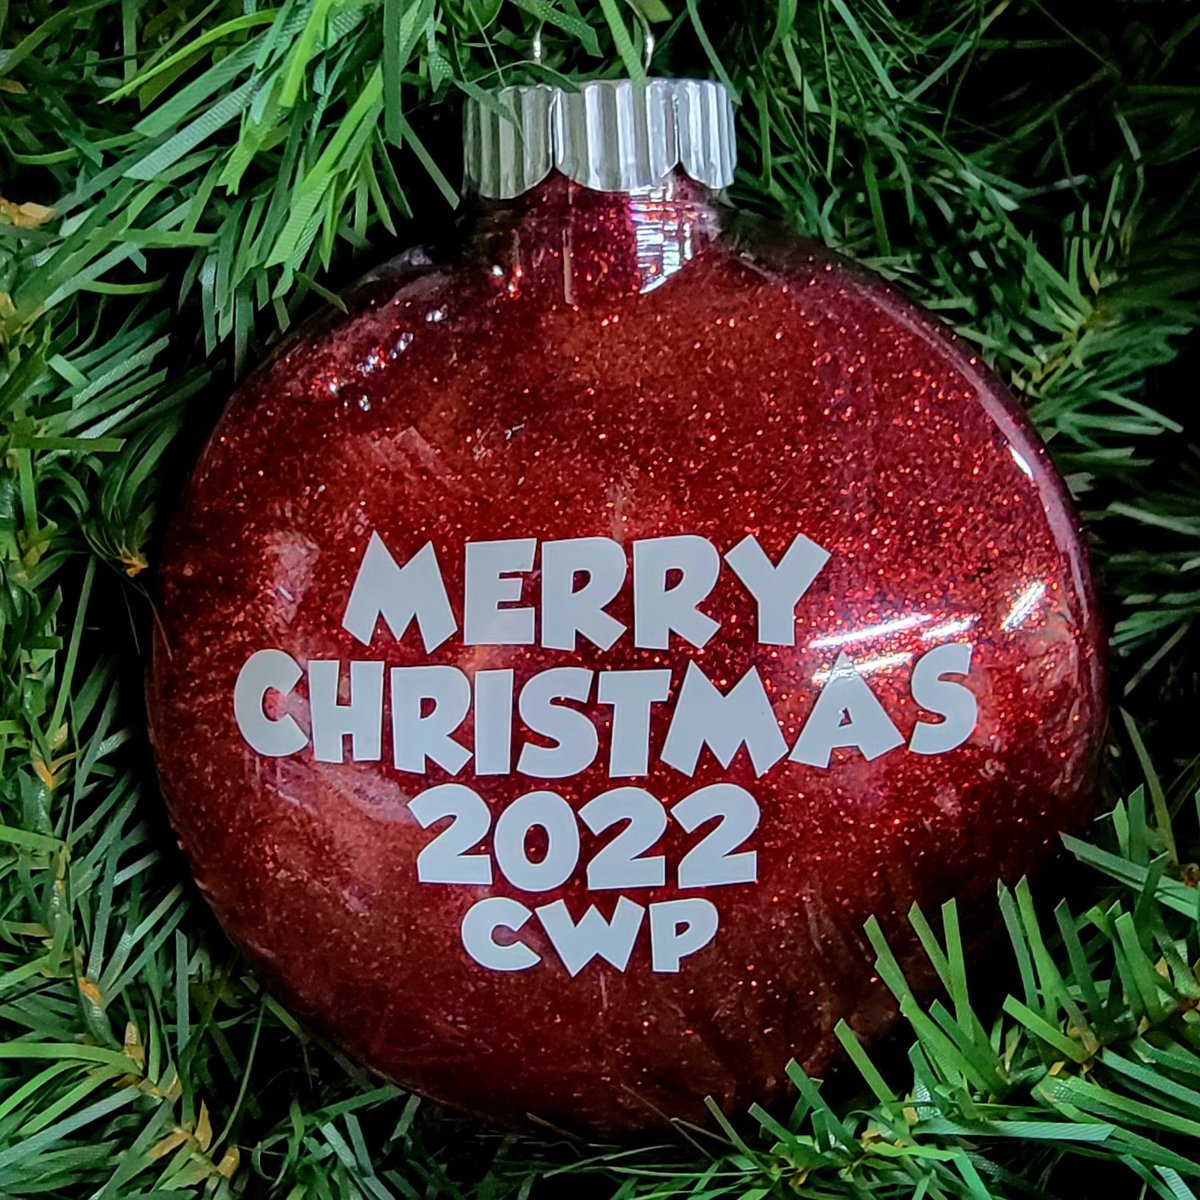 Christmas Ornament 2022 Limited Edition CWP Pepper 